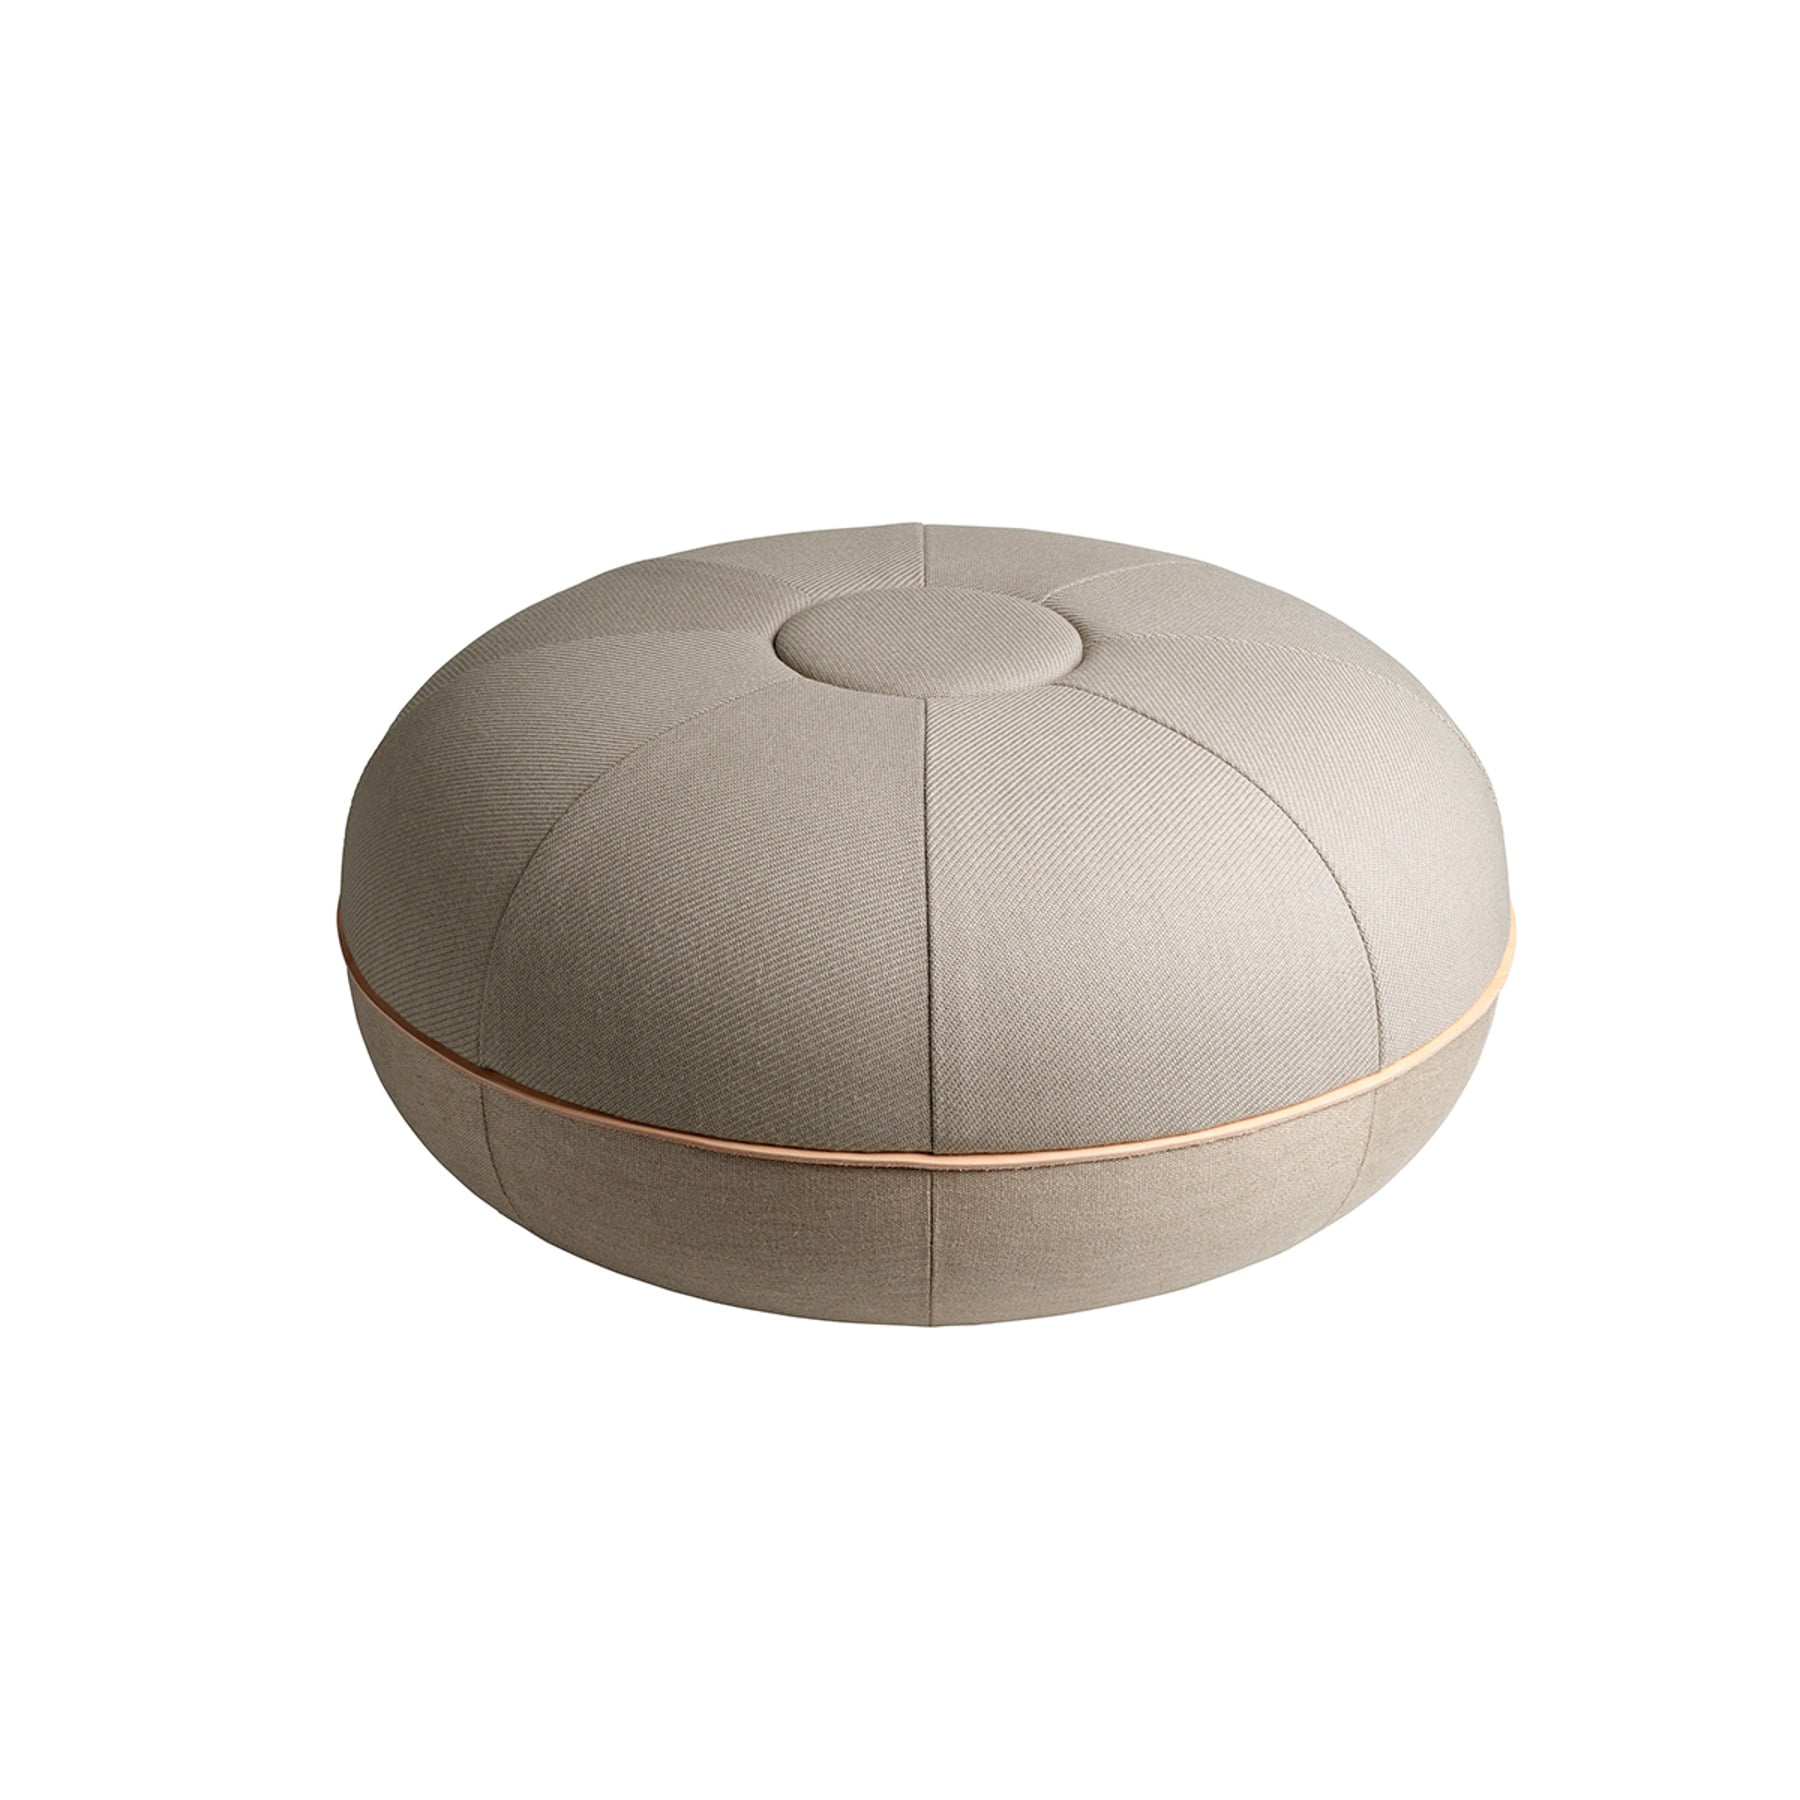 Pouf Large Beige  퍼프 라지 베이지